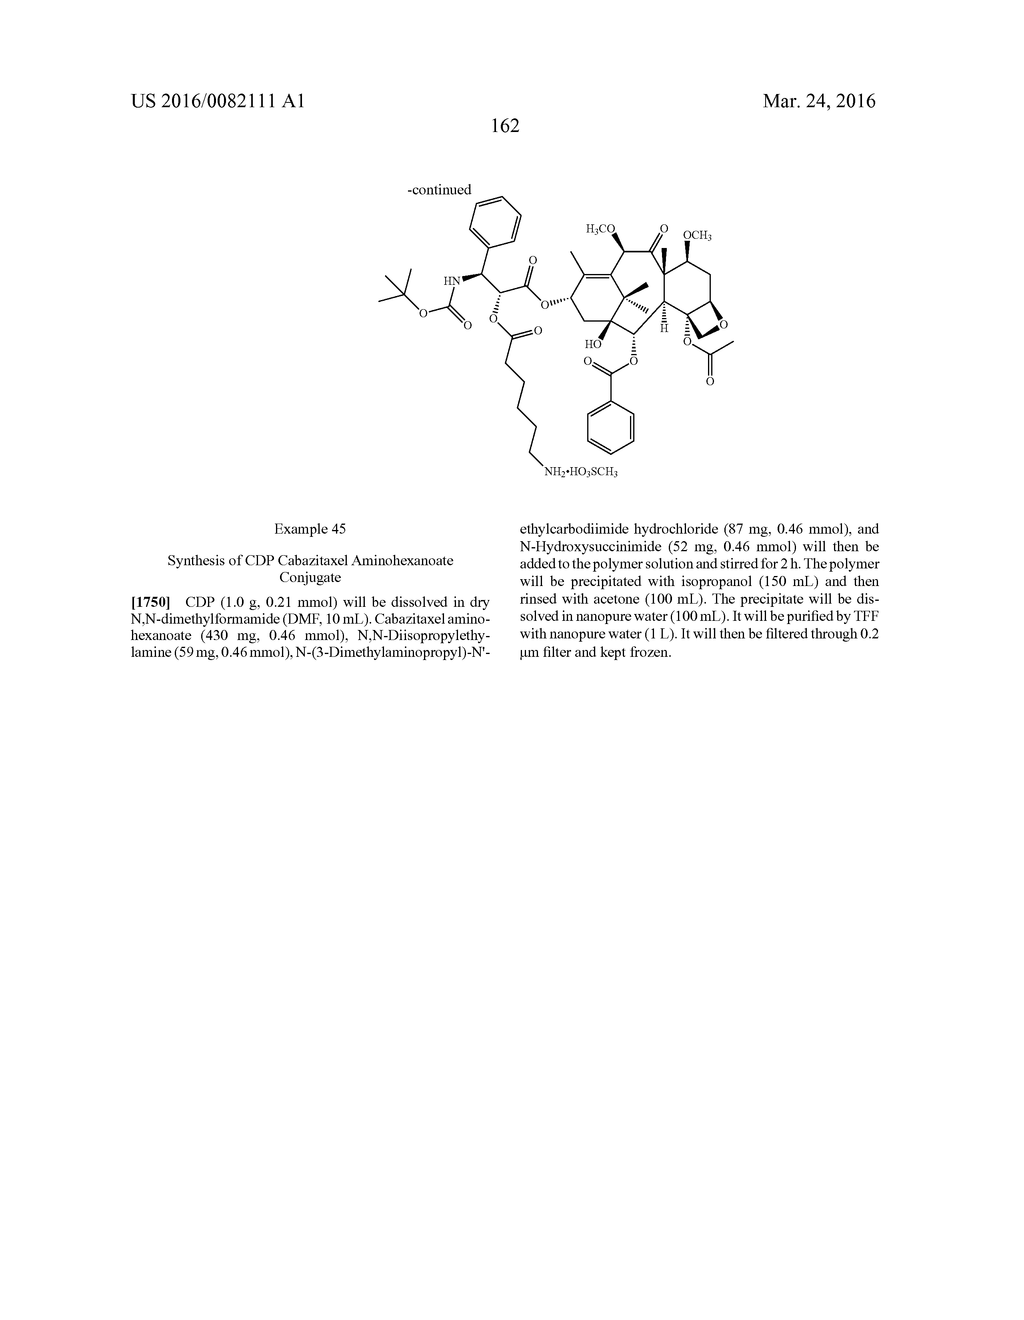 CYCLODEXTRIN-BASED POLYMERS FOR THERAPEUTIC DELIVERY - diagram, schematic, and image 175